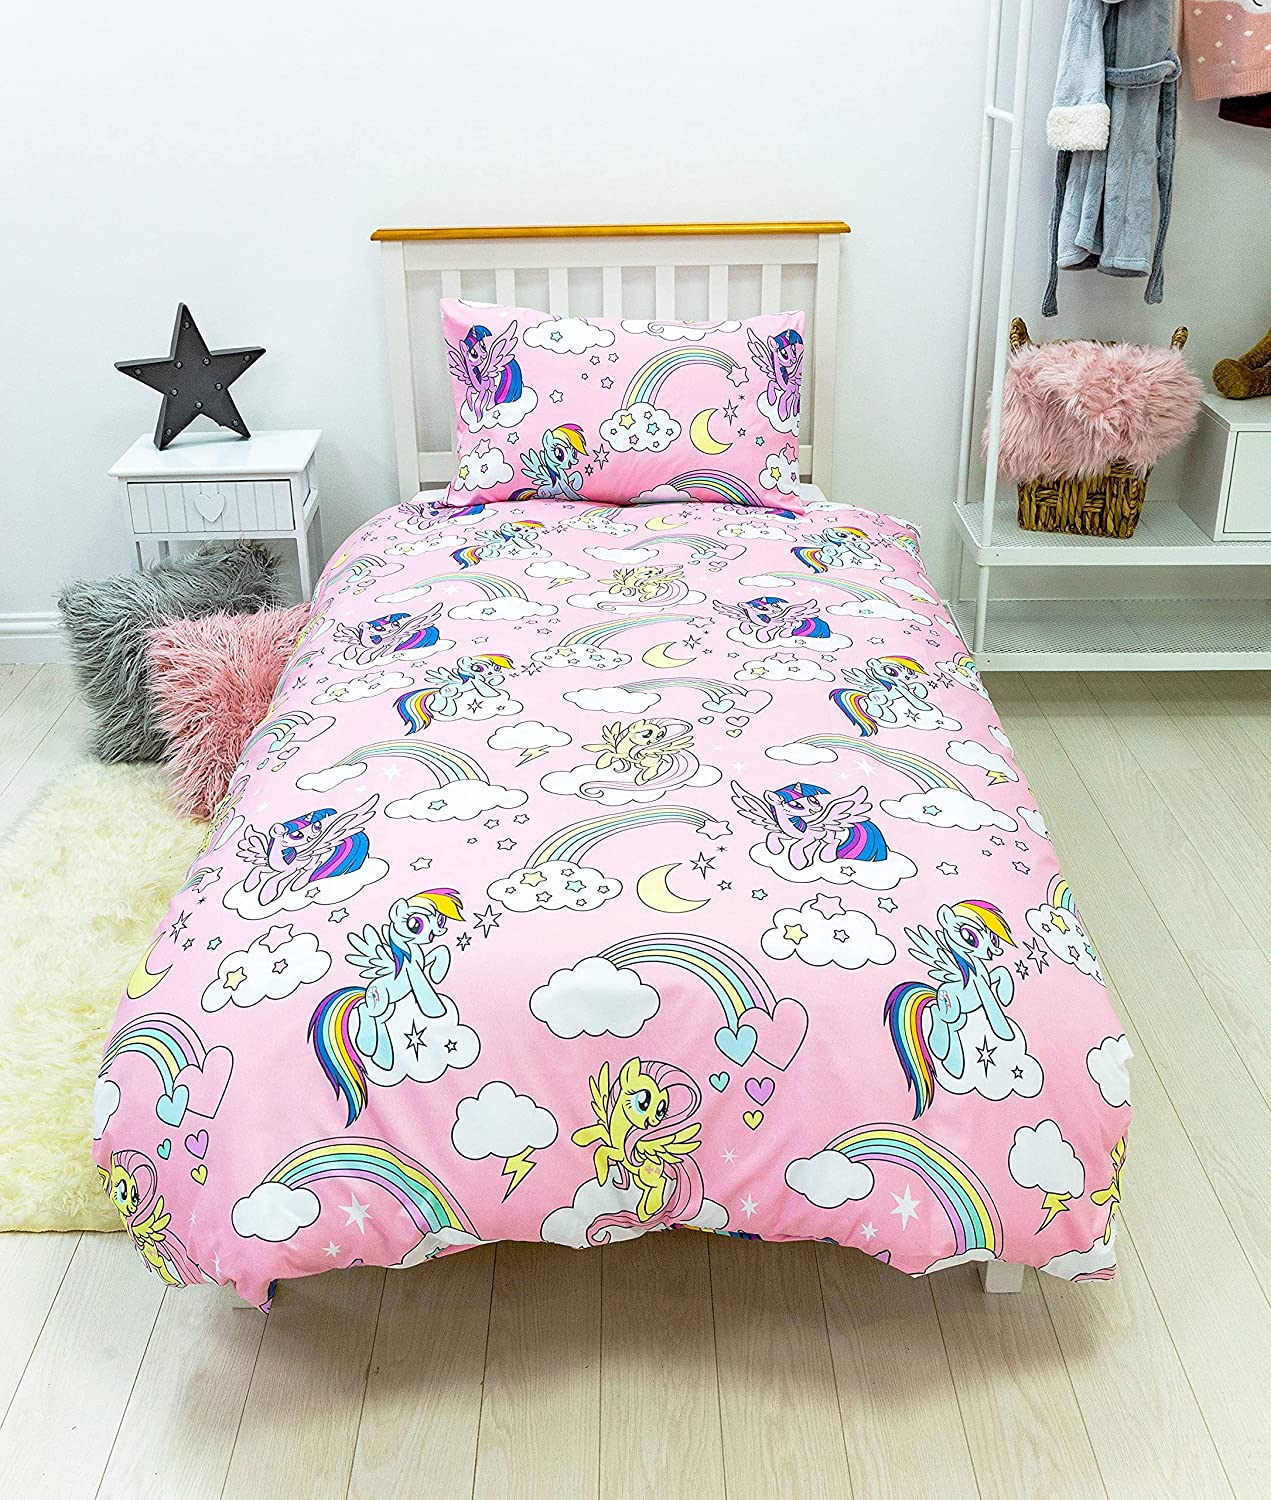 Single Bed My Little Pony 'Besties' Duvet Cover Set Character Bedding